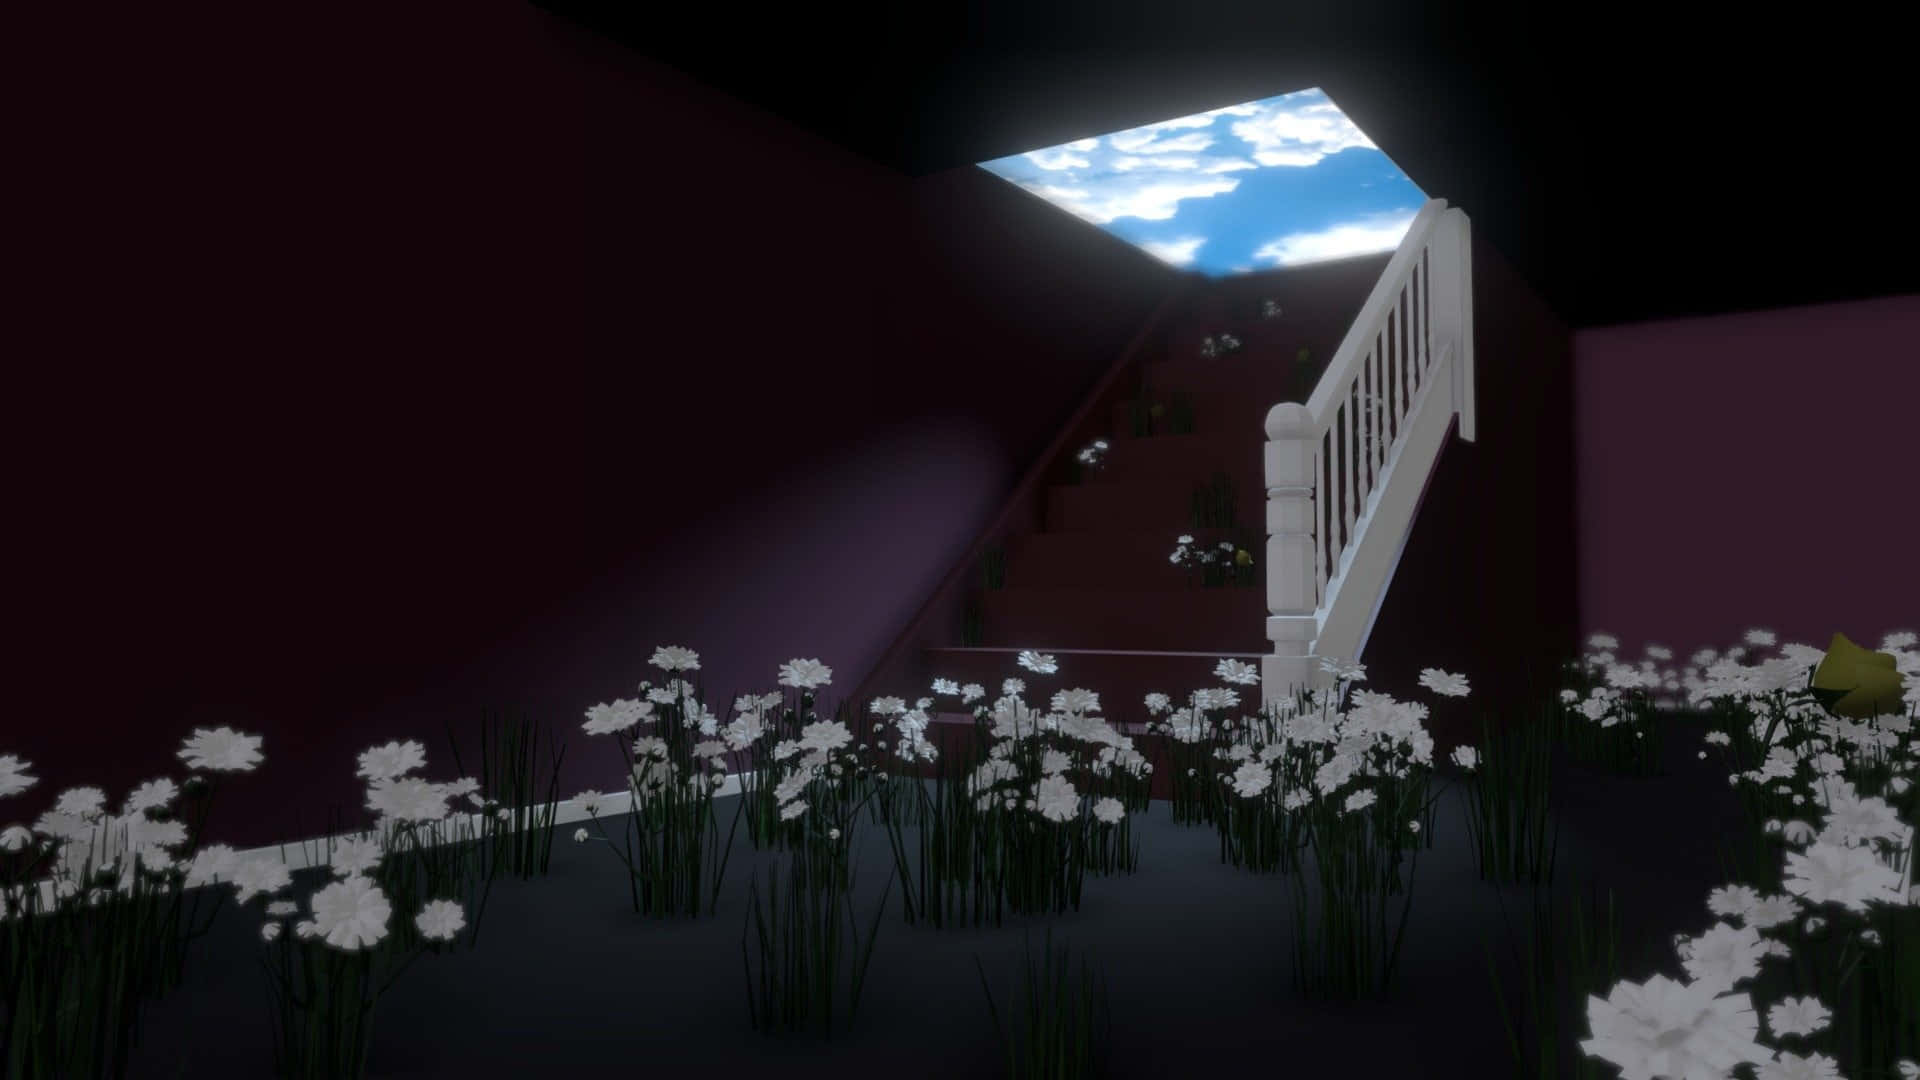 A Room With Flowers And Stairs In The Background